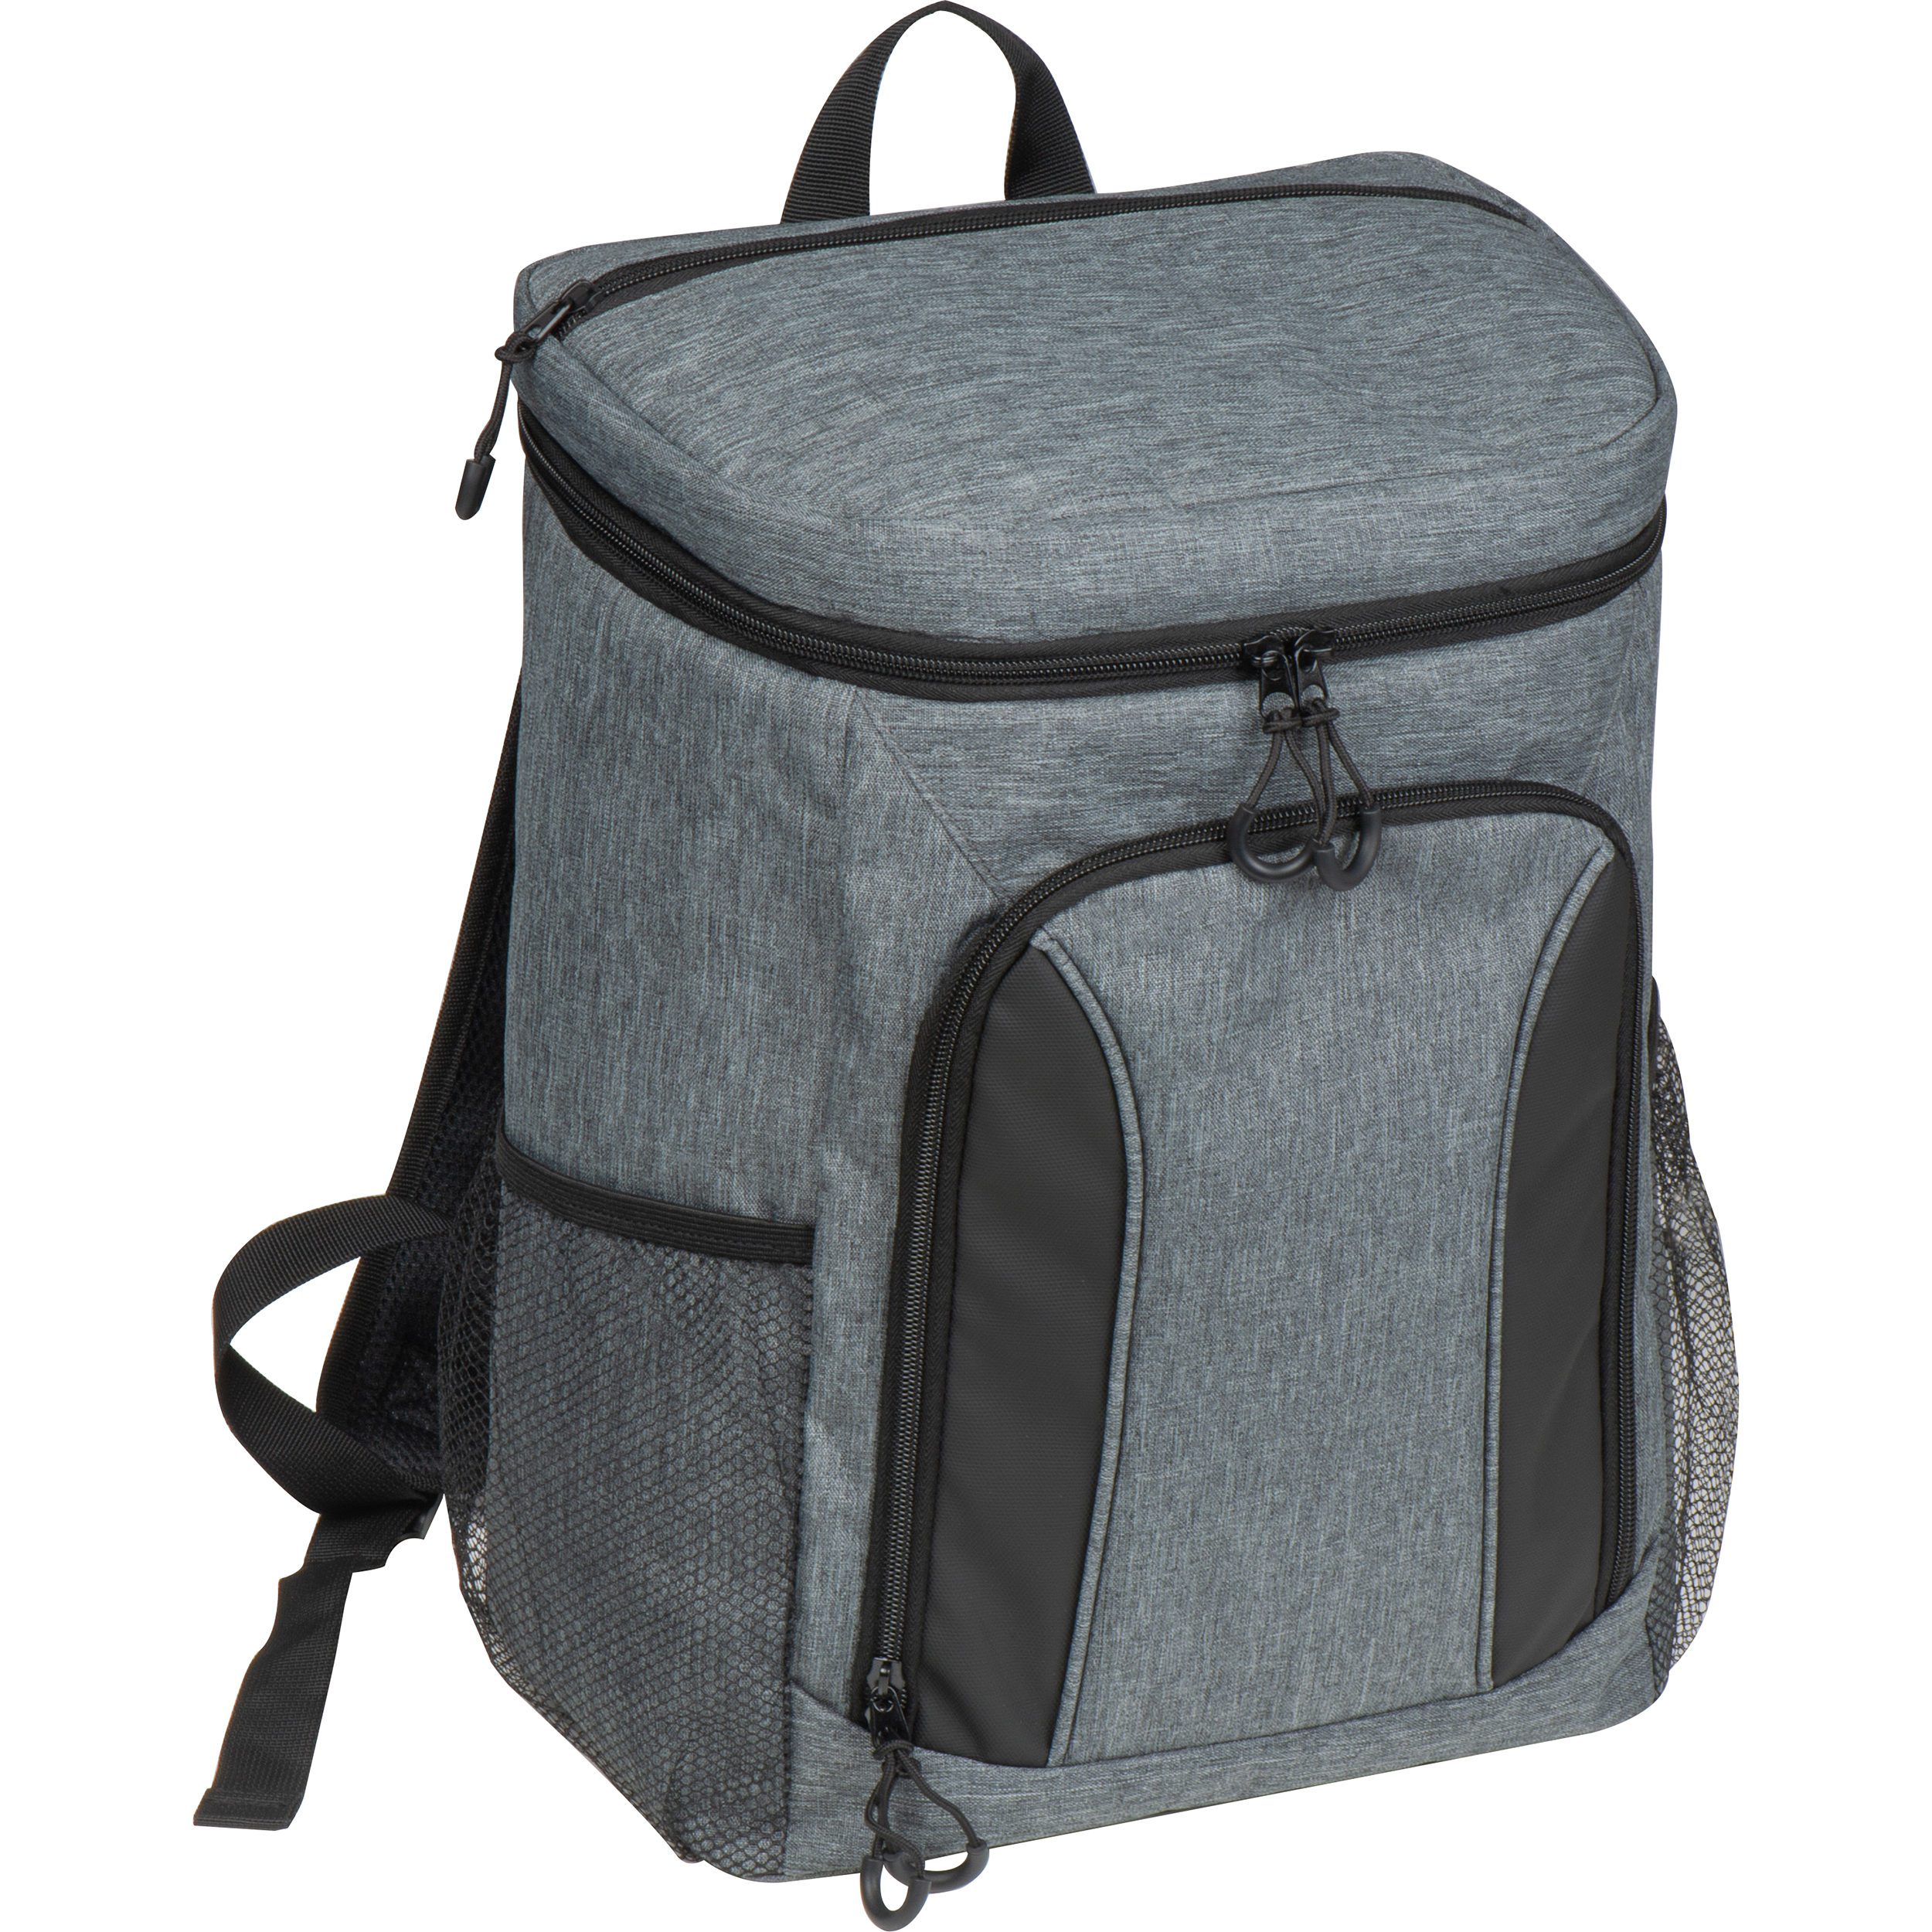 Cooling backpack - Totton